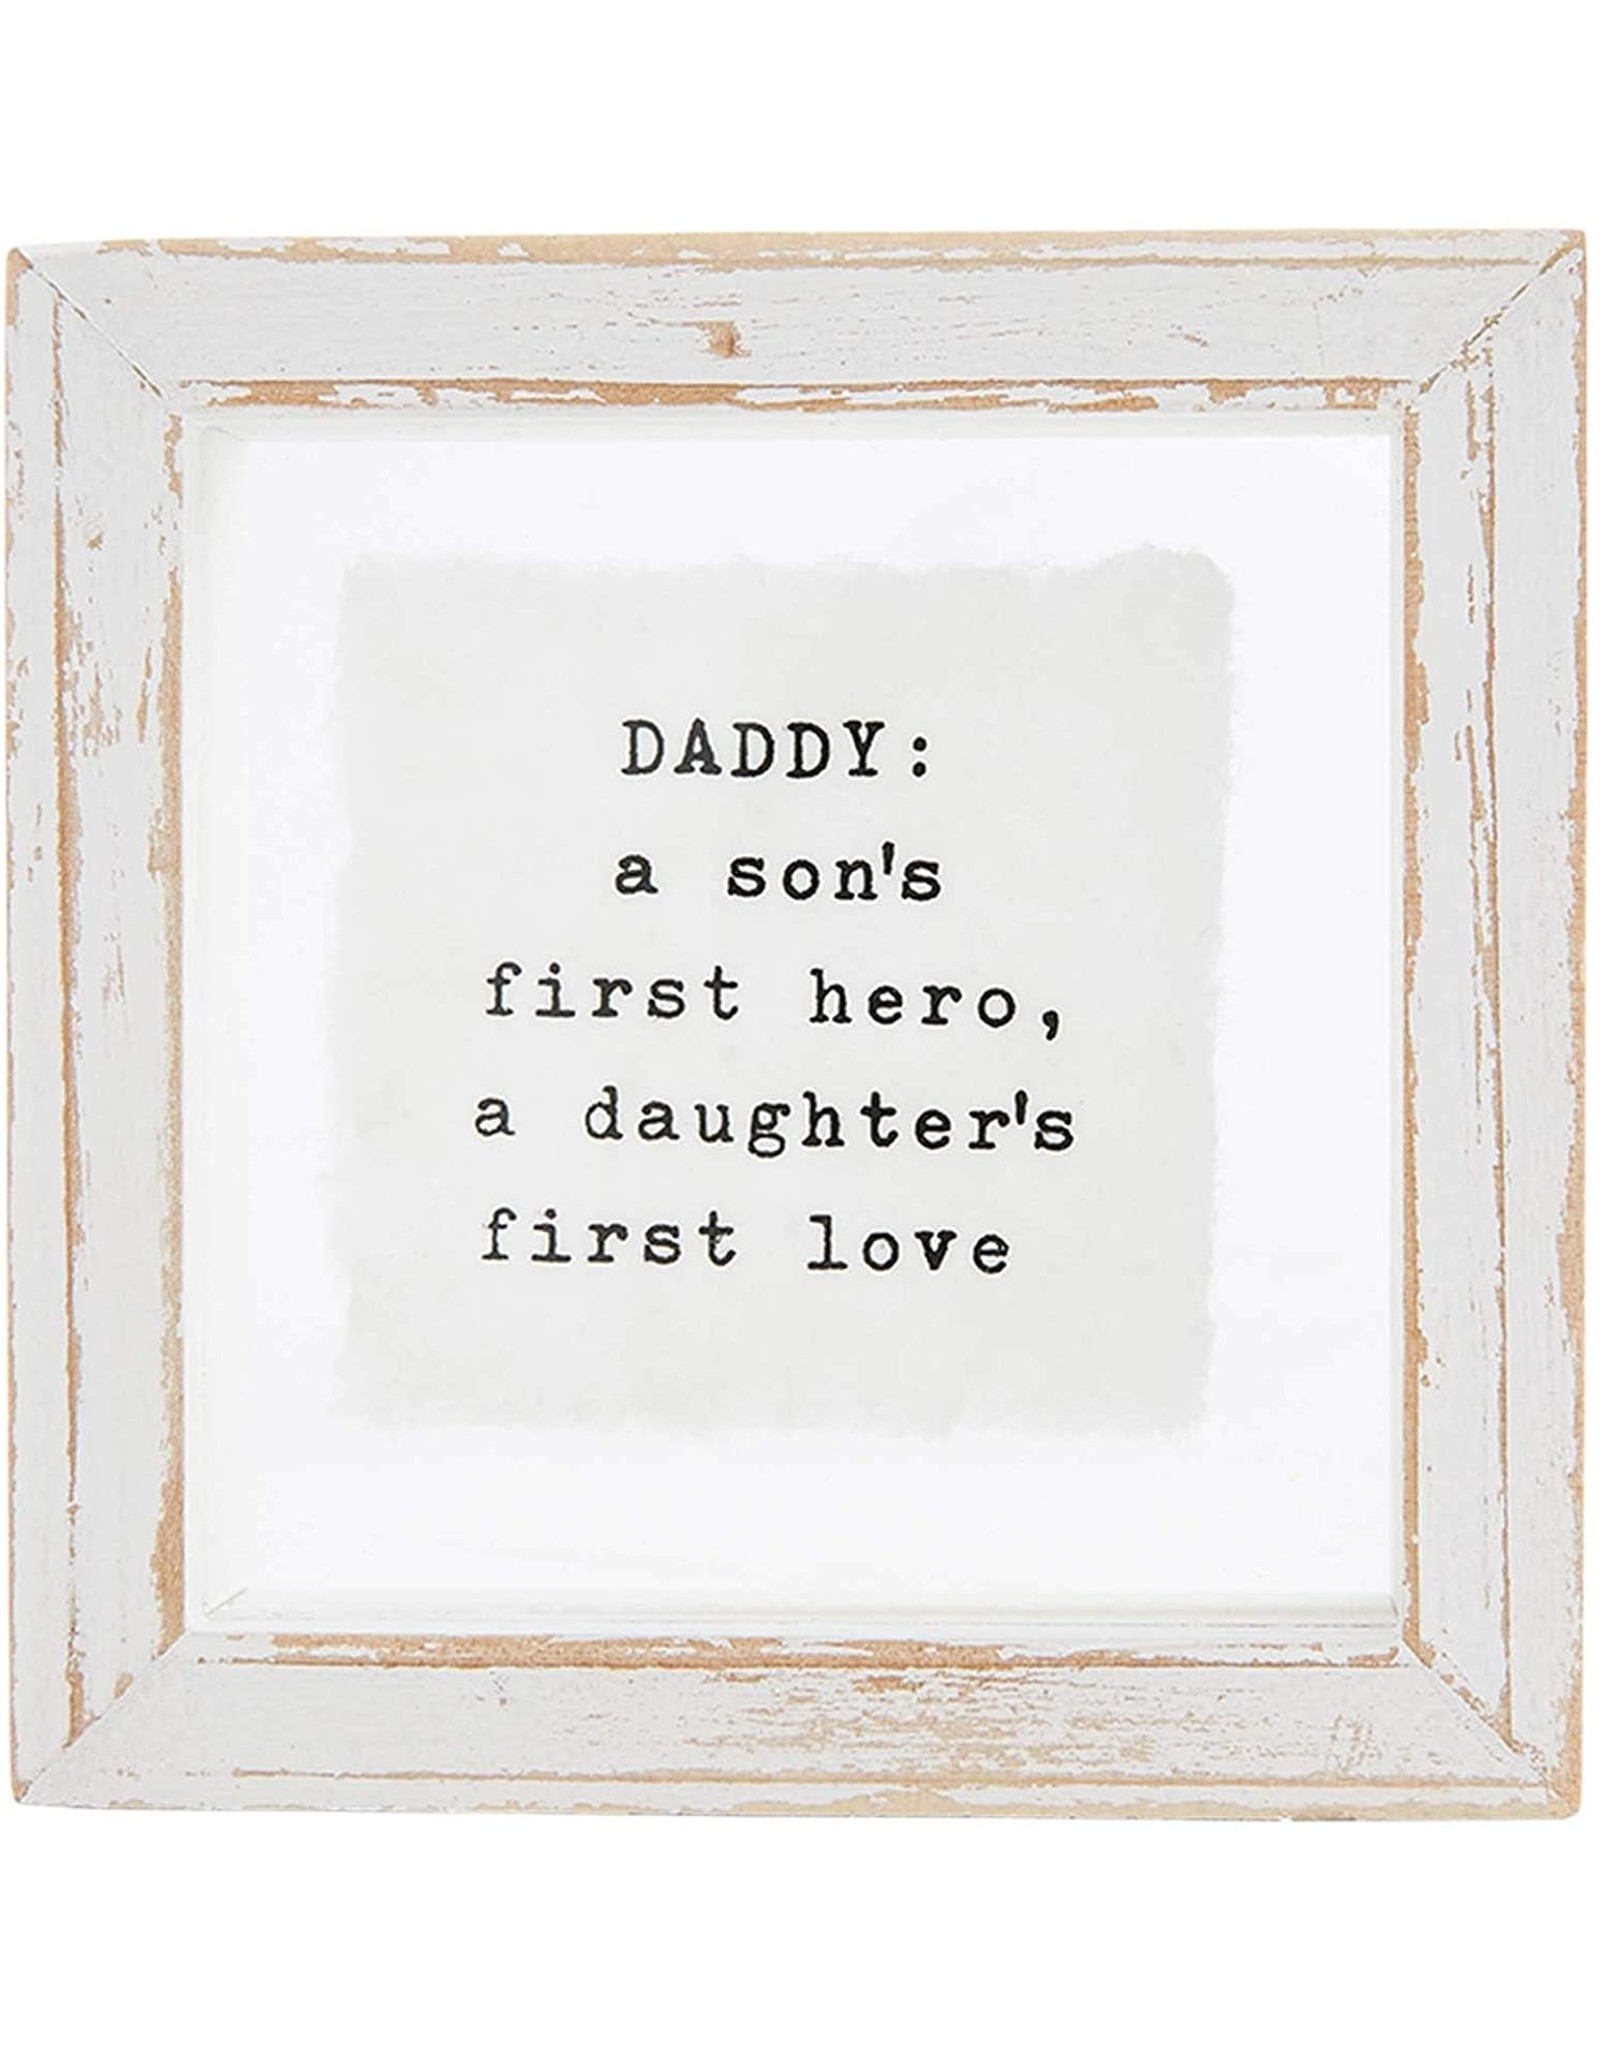 Mud Pie Pressed Glass Daddy Plaque With Sentiment